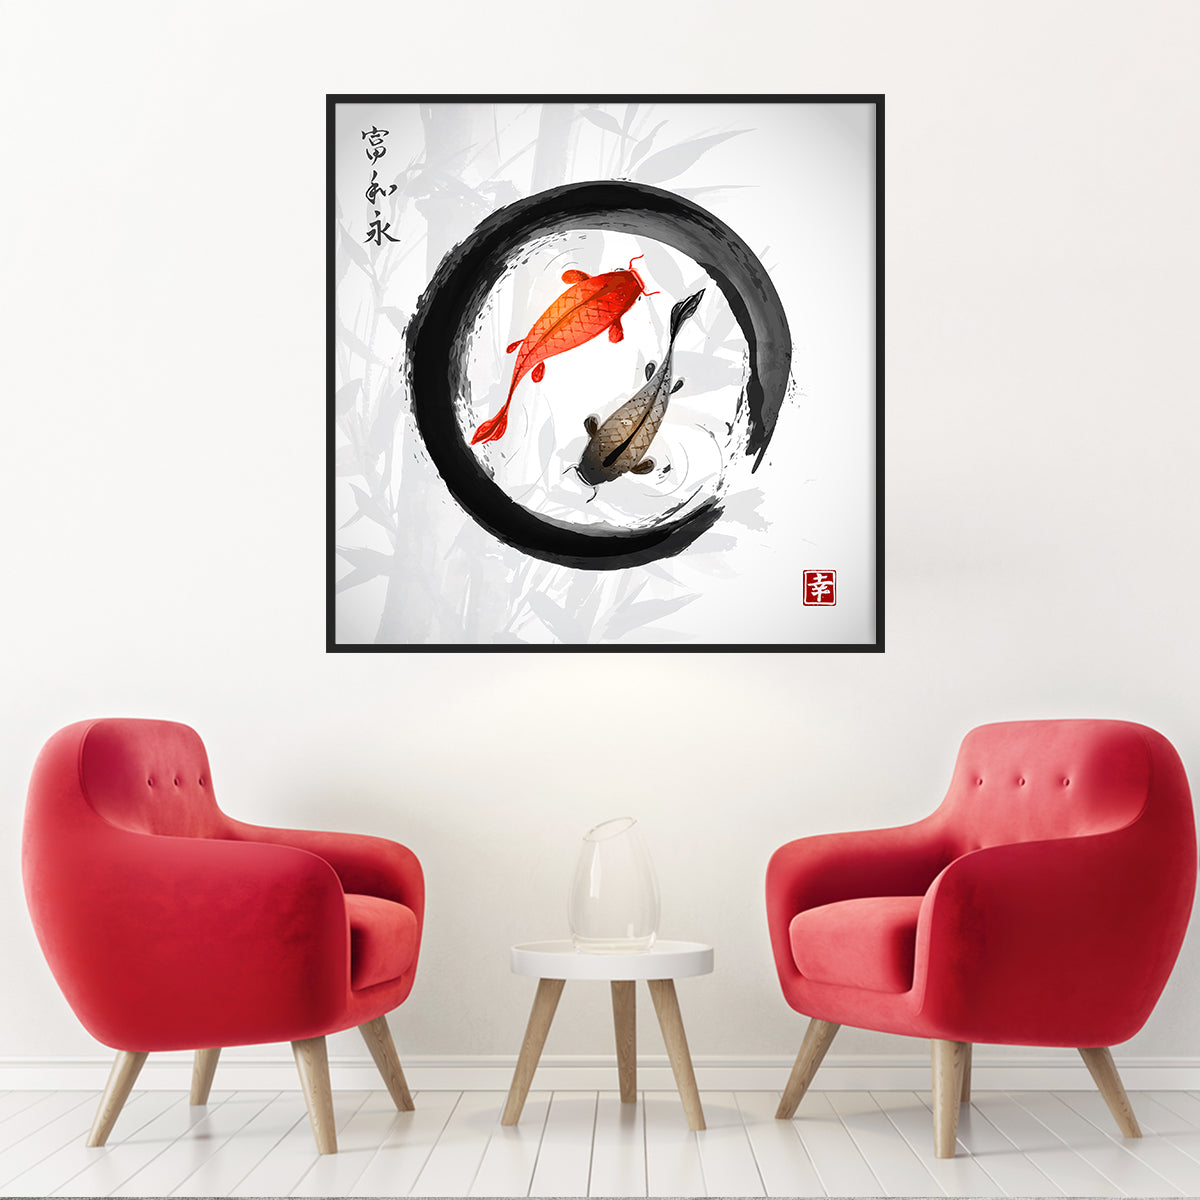 Red and Black Koi Carp Posters For Home Decor-Square Posters NOT FRAMED-CetArt-8″x8″ inches-CetArt